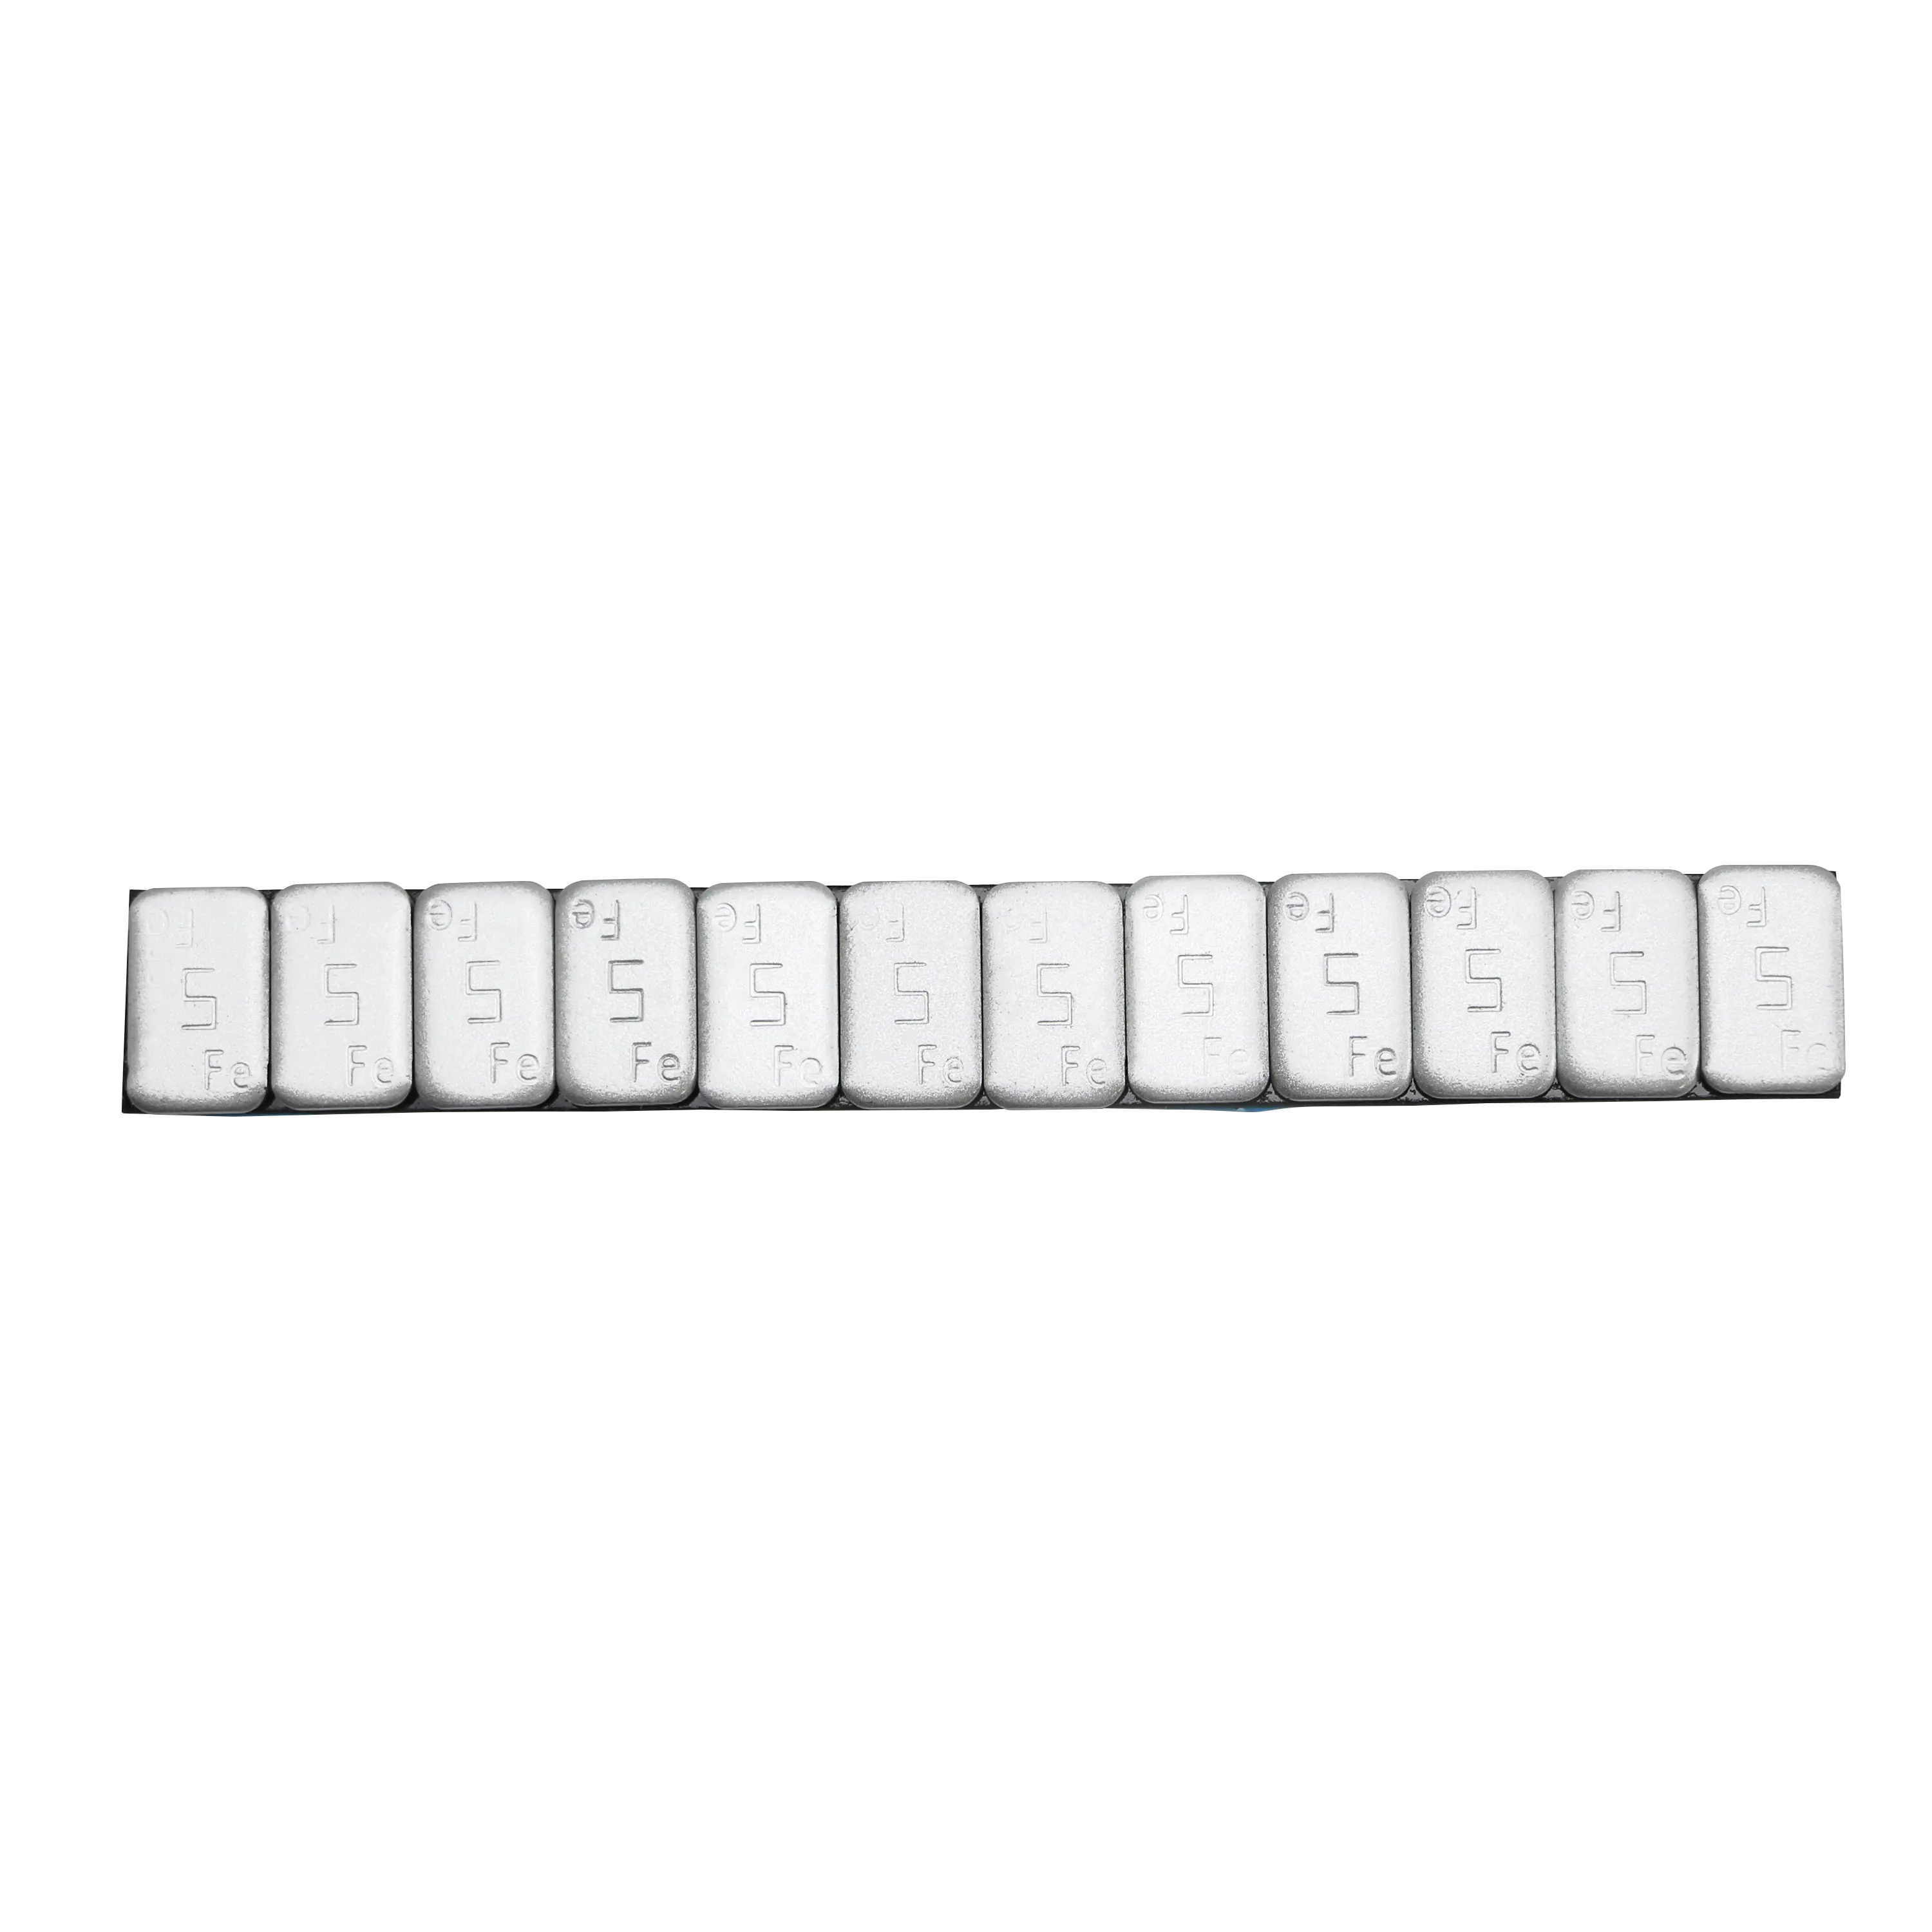 2.5g/5g/10g Stick-on Steel Balancing Weights High Quality 60g Adhesive FE Wheel Balance Weights 1/4oz Iron Alignment Block